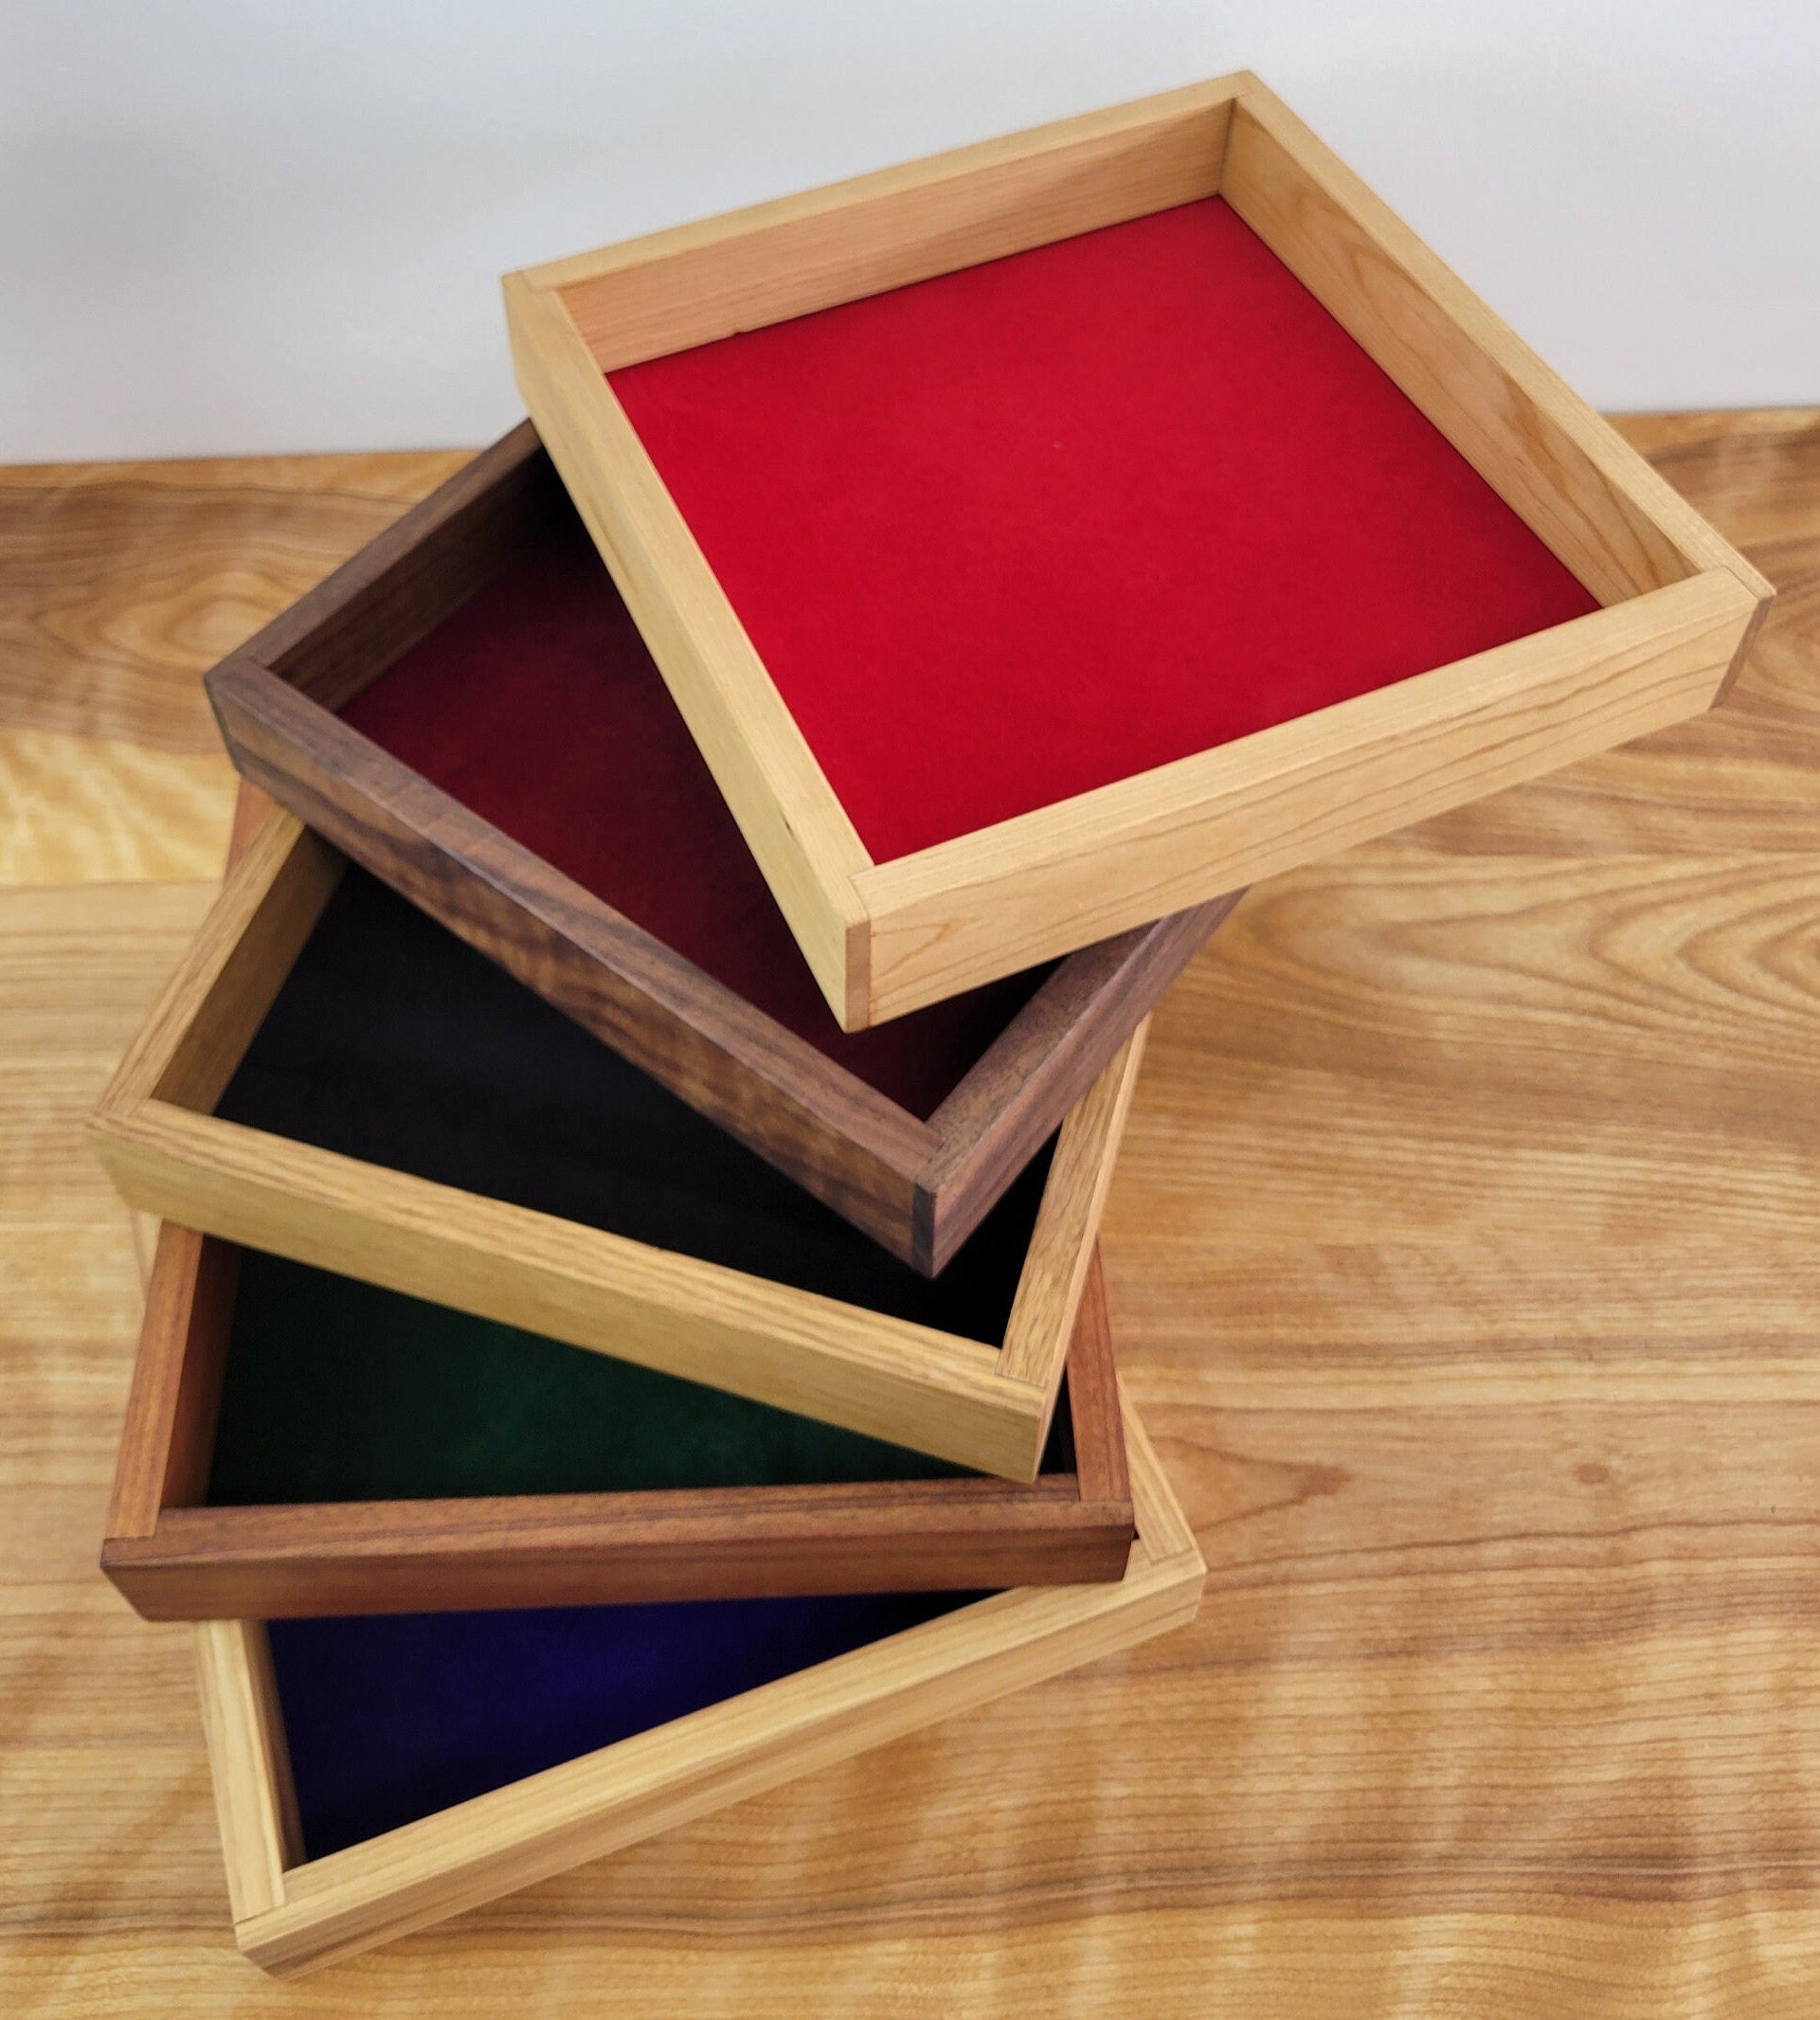 Large Wooden Box with Small Wood Tray-Custom Handmade Wood Boxes